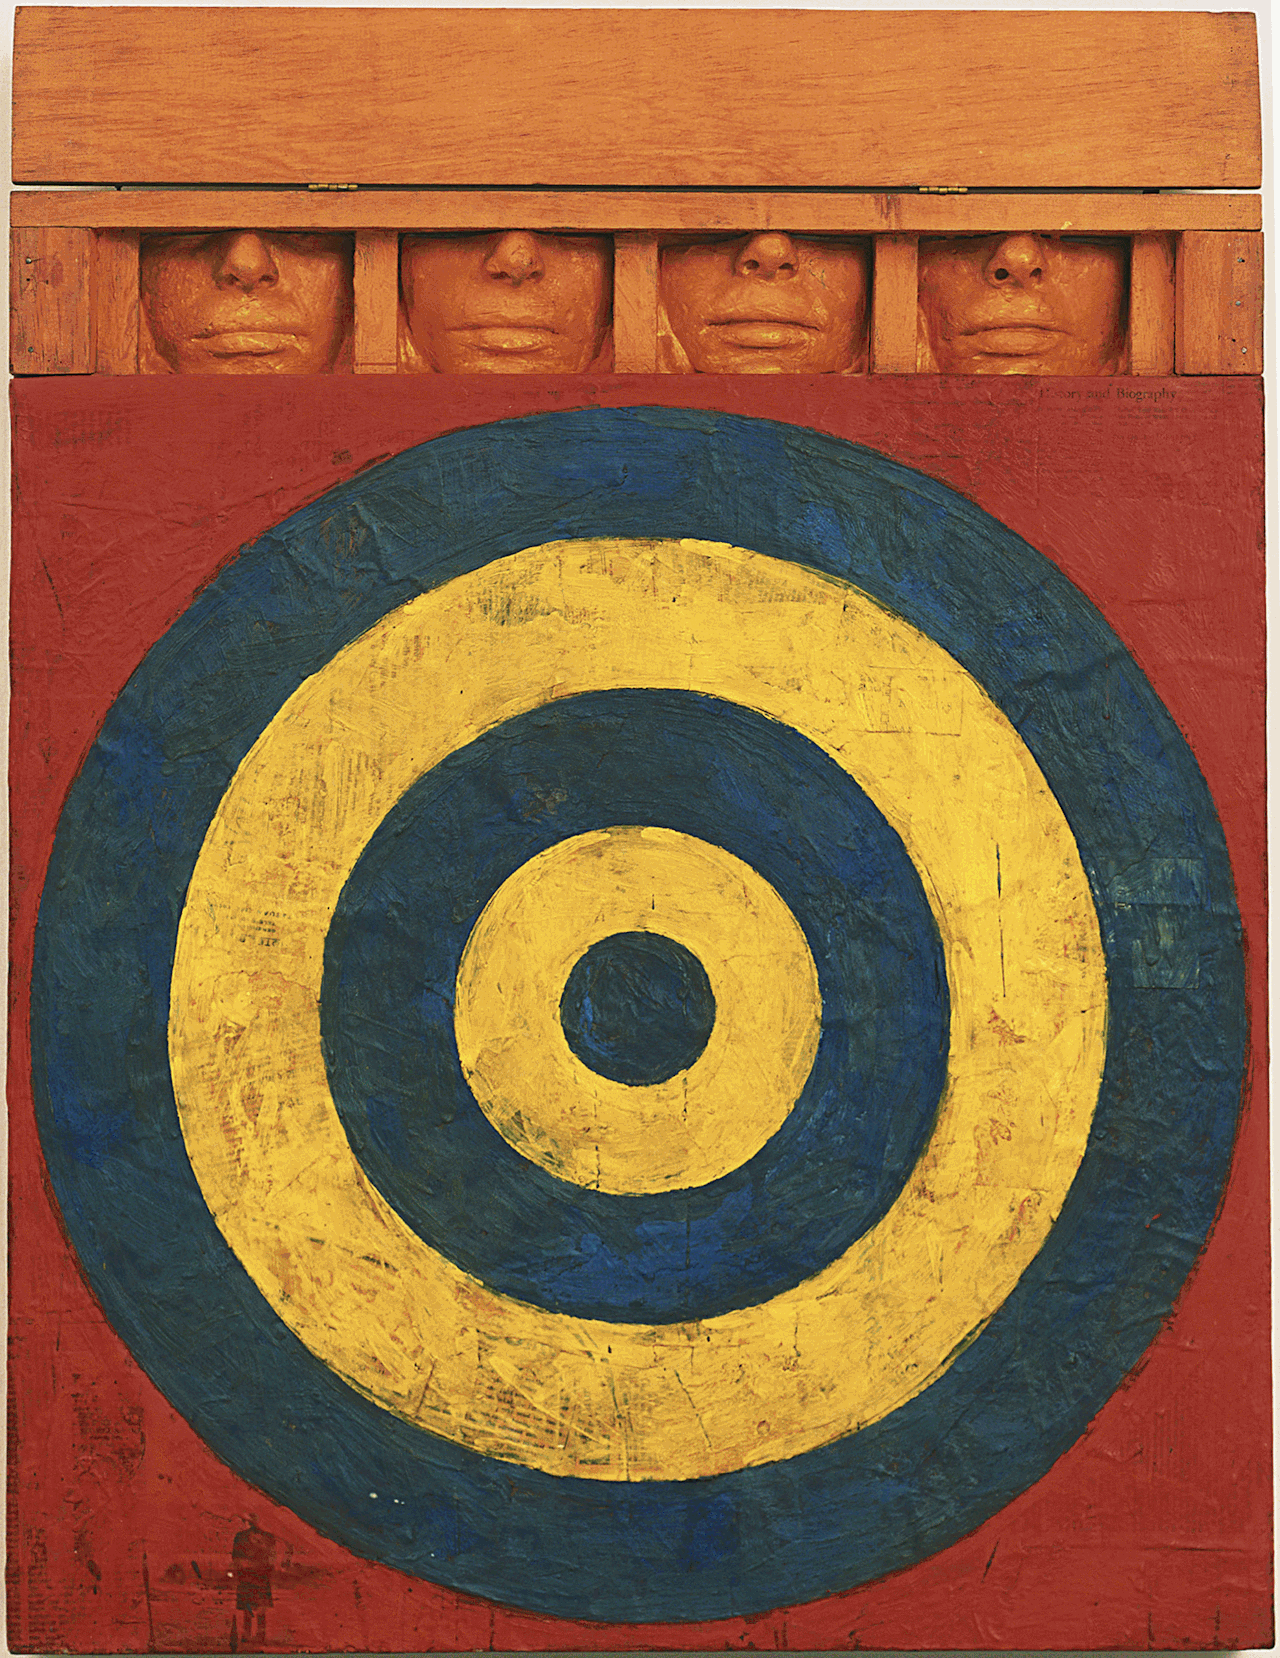  Jasper Johns, Target With Four Faces, 1955